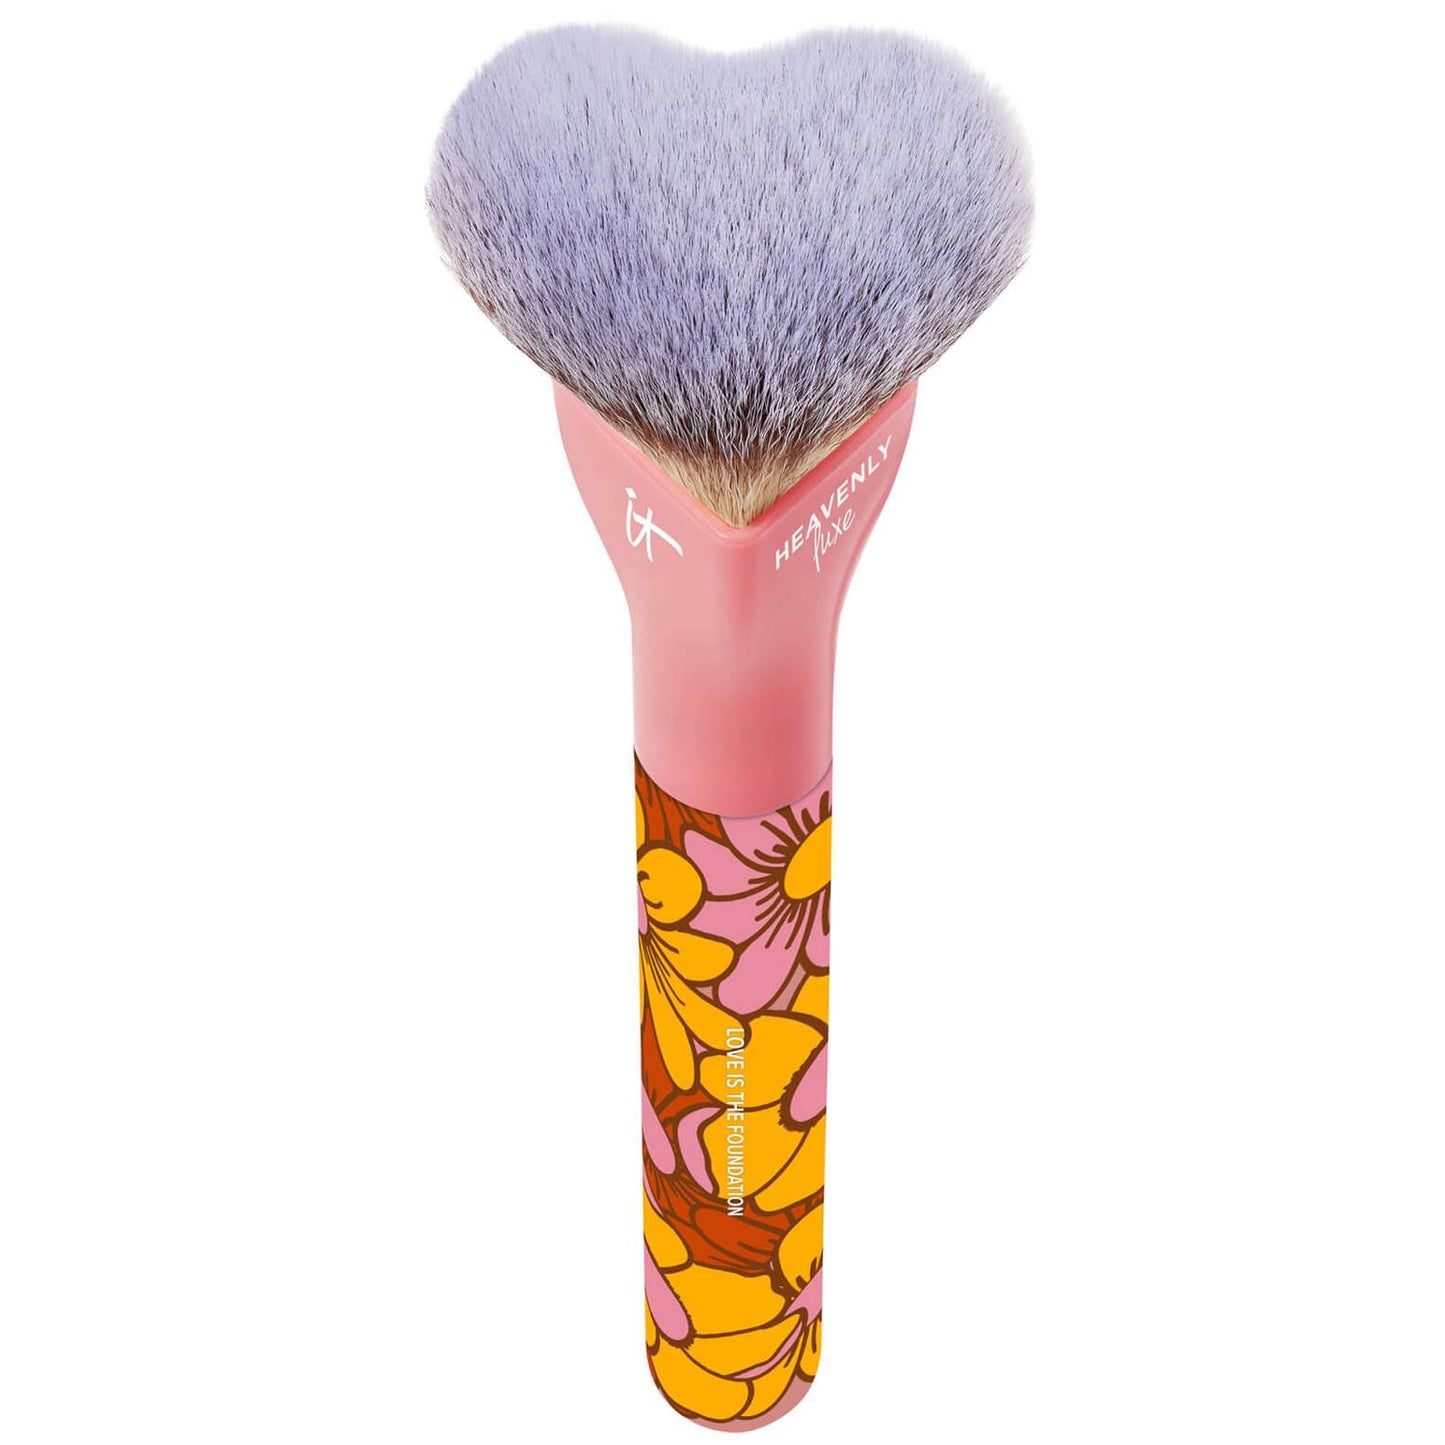 It Cosmetics Heavenly Luxe Flower Power Foundation Brush